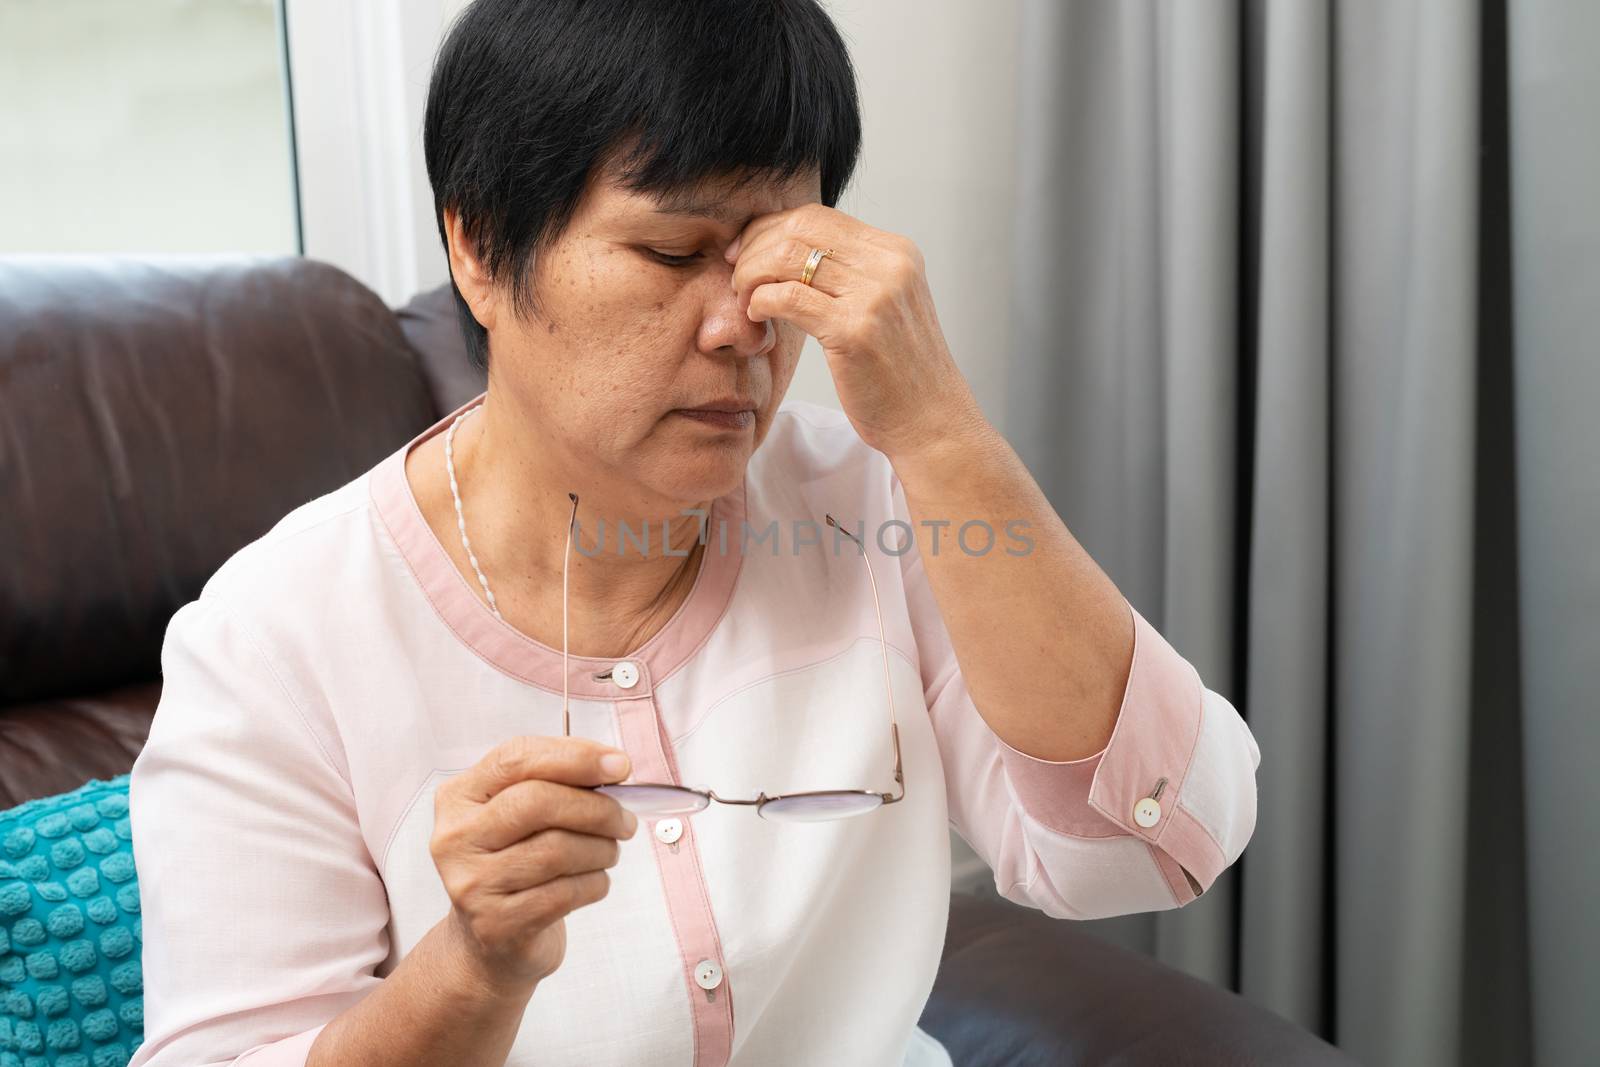 Tired old woman removing eyeglasses, massaging eyes after readin by psodaz